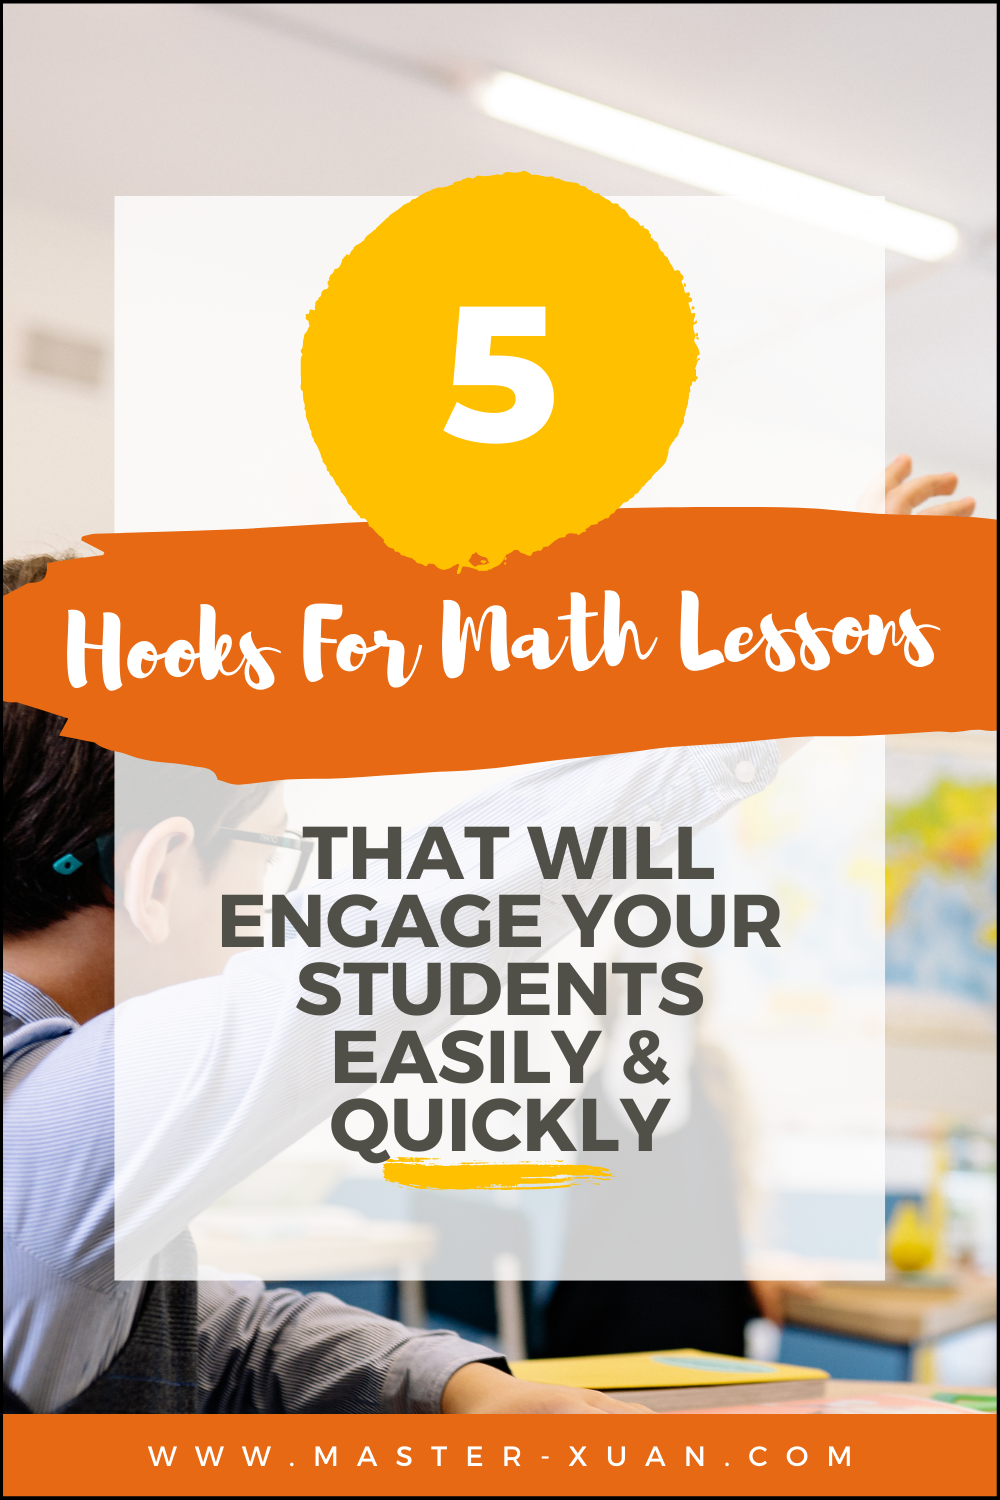 5 hooks for math lessons that will get your students excited.